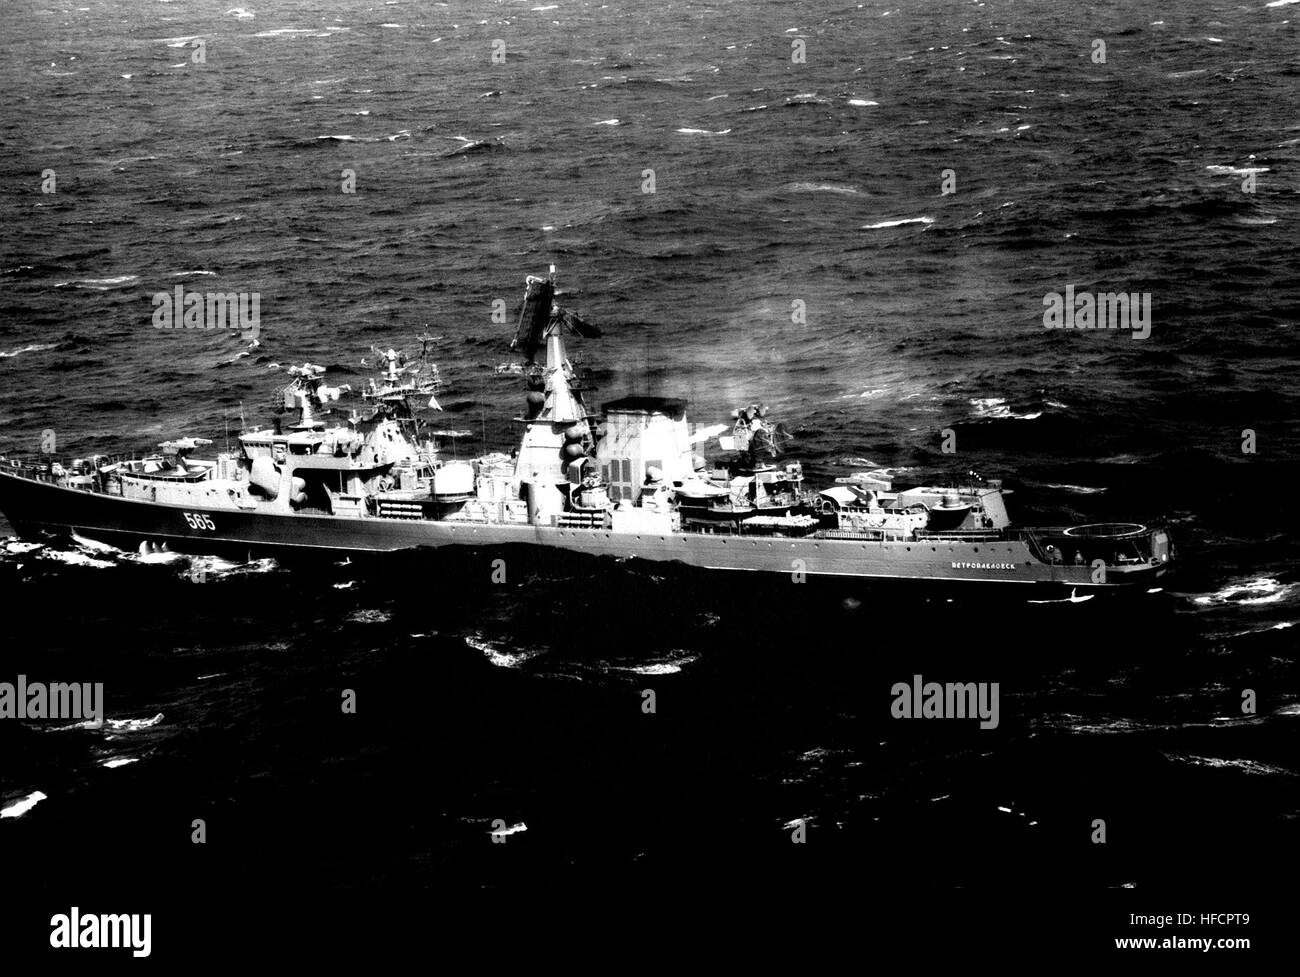 An aerial port quarter view of a Soviet 'Kara' class guided missile cruiser underway in the operating area of the USS KITTY HAWK (CV 63) Task Group. Petropavlovsk1984b Stock Photo